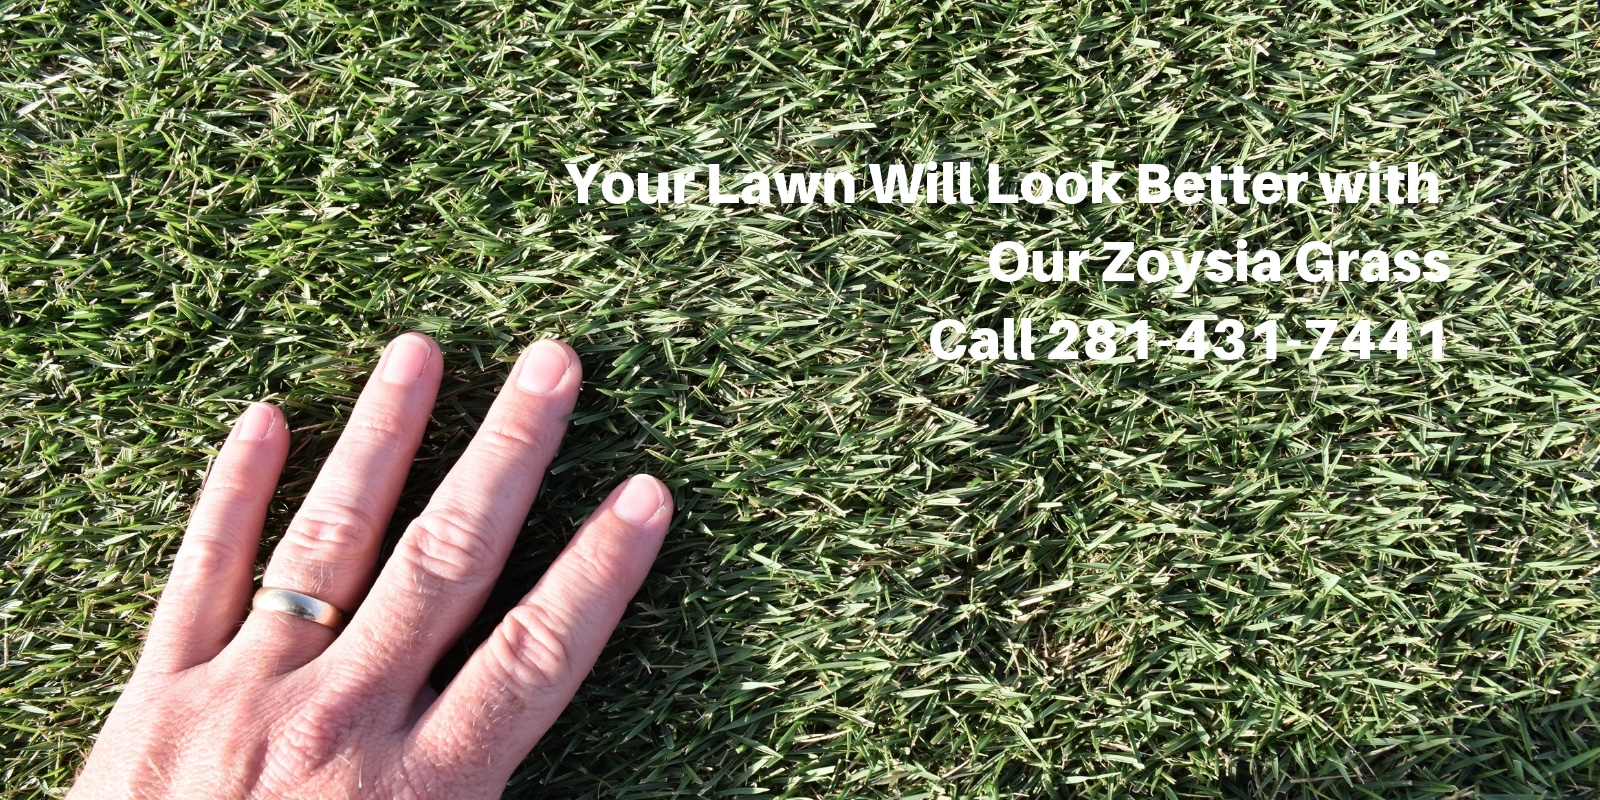 Your Lawn Will Look Better with Our Zoysia Grass